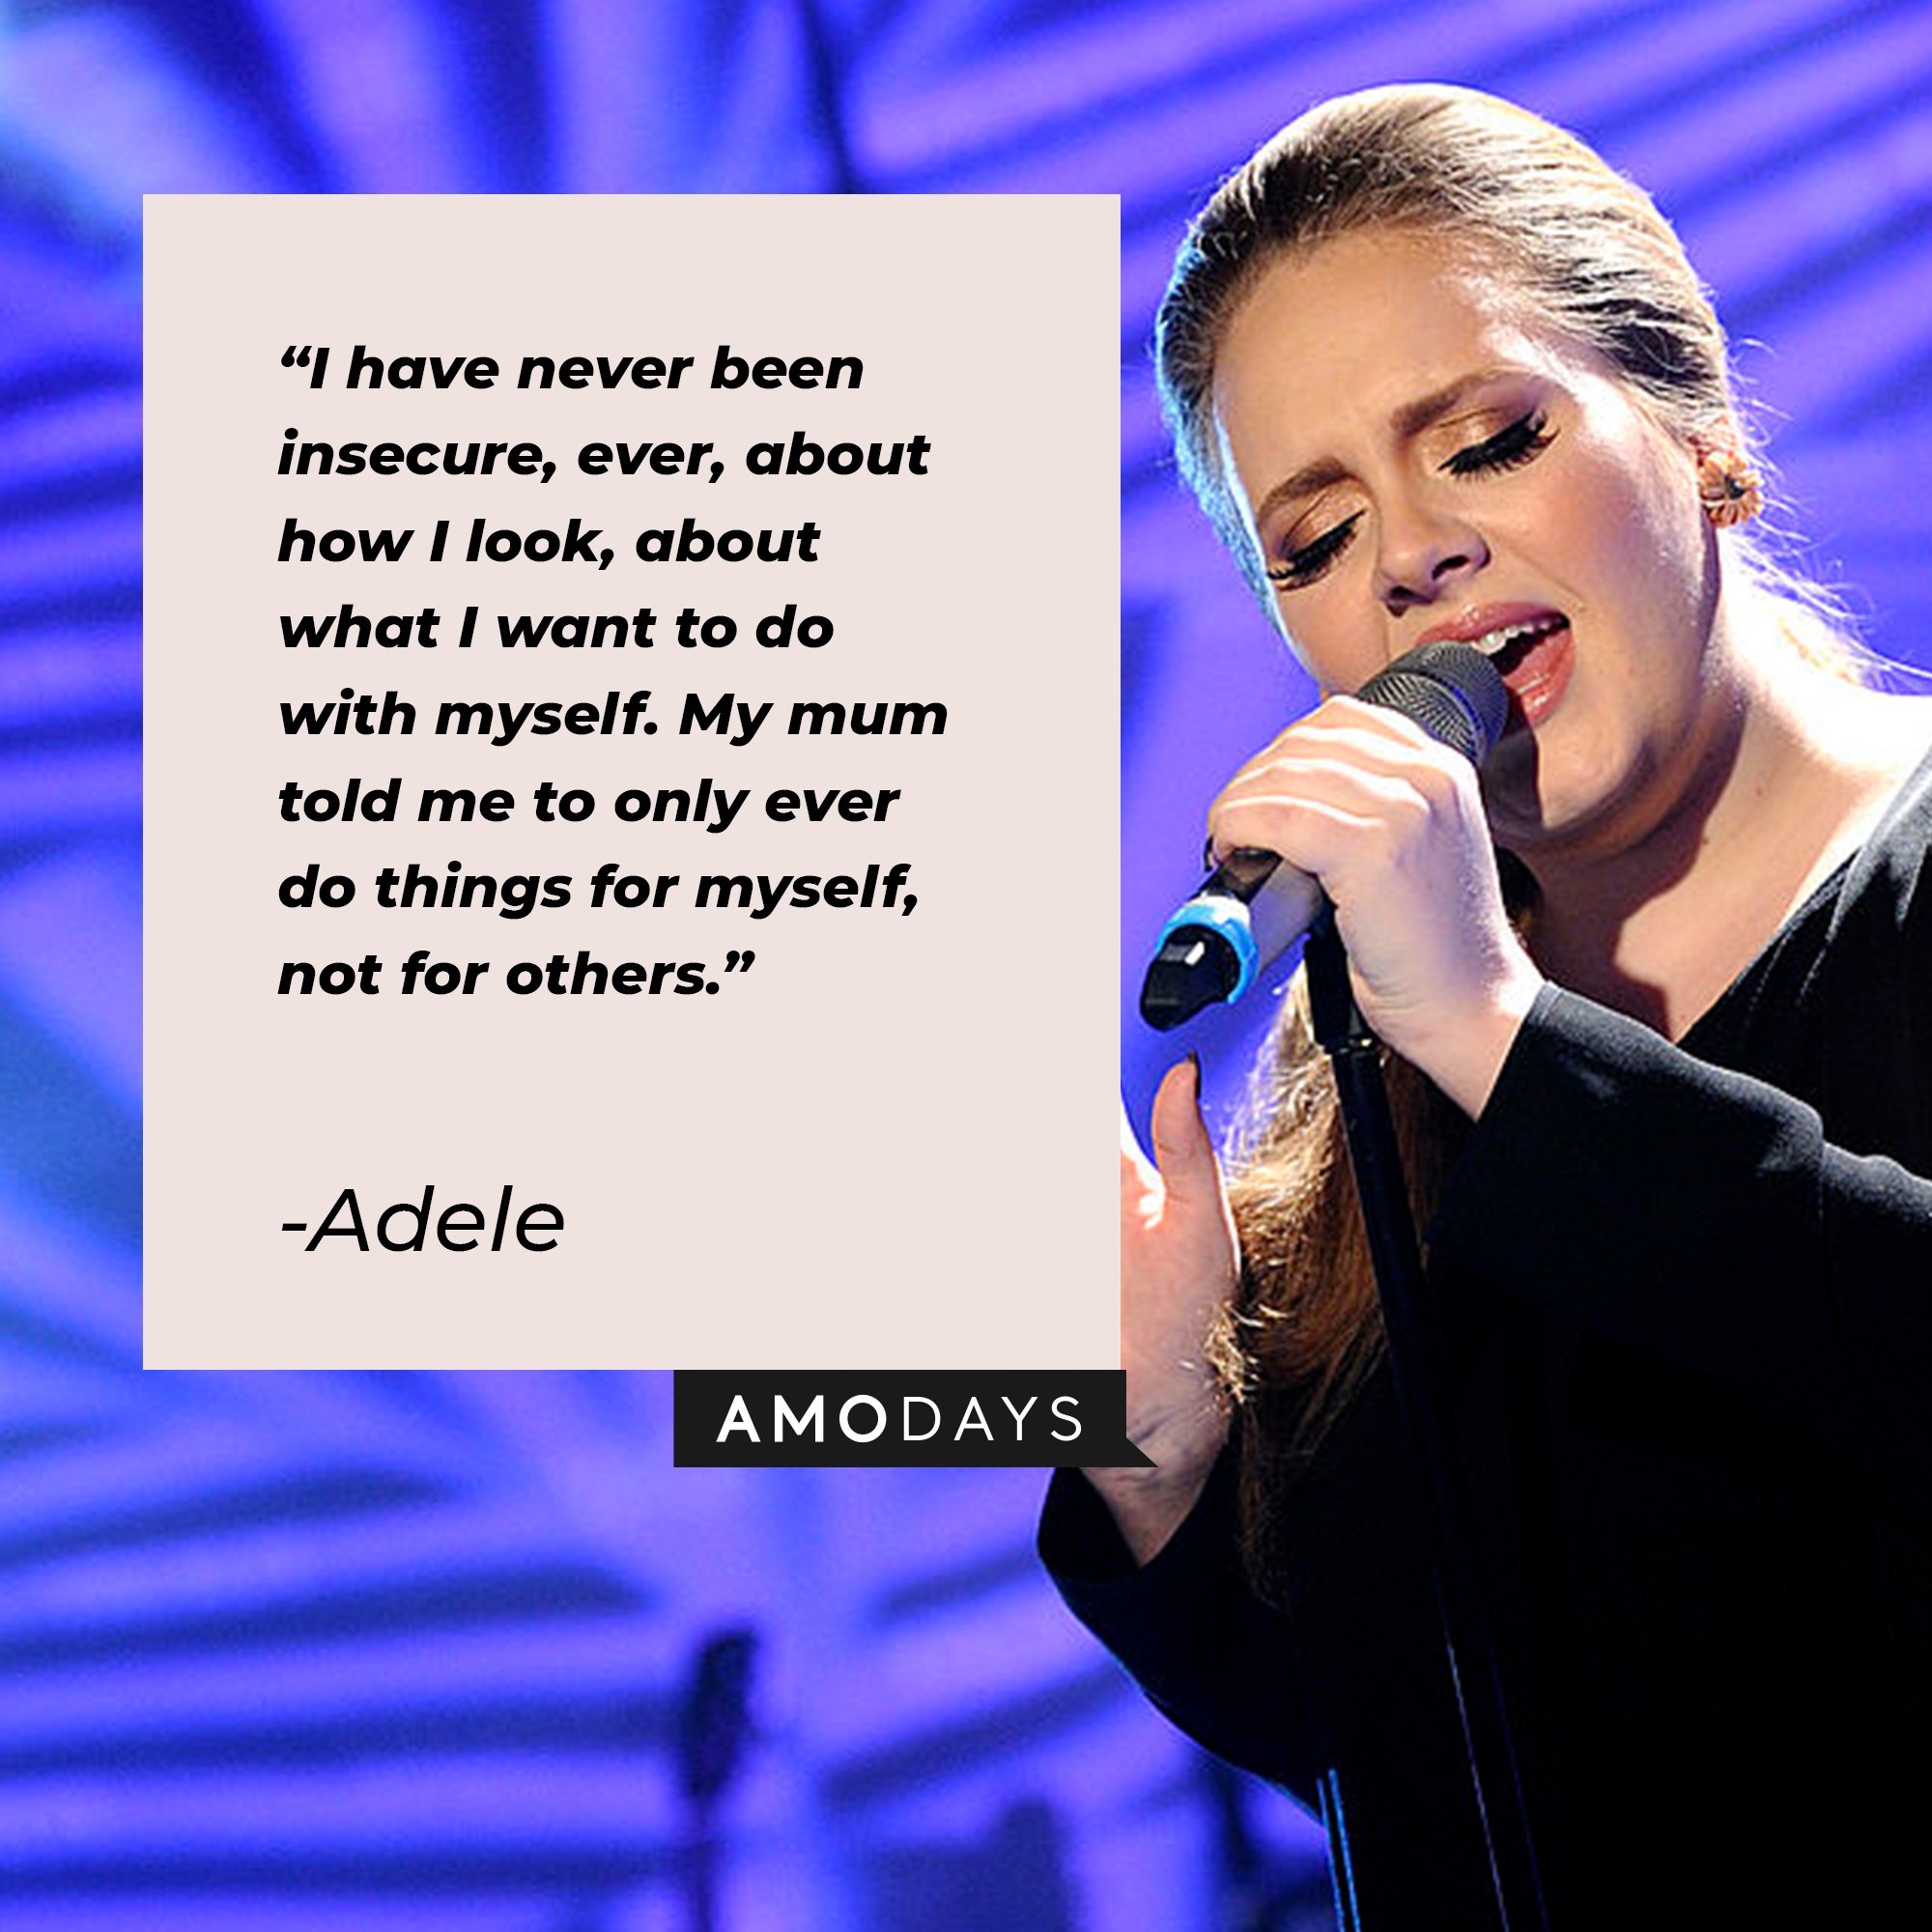 Adele’s quote: "I have never been insecure, ever, about how I look, about what I want to do with myself. My mum told me to only ever do things for myself, not for others." |  Image: AmoDays